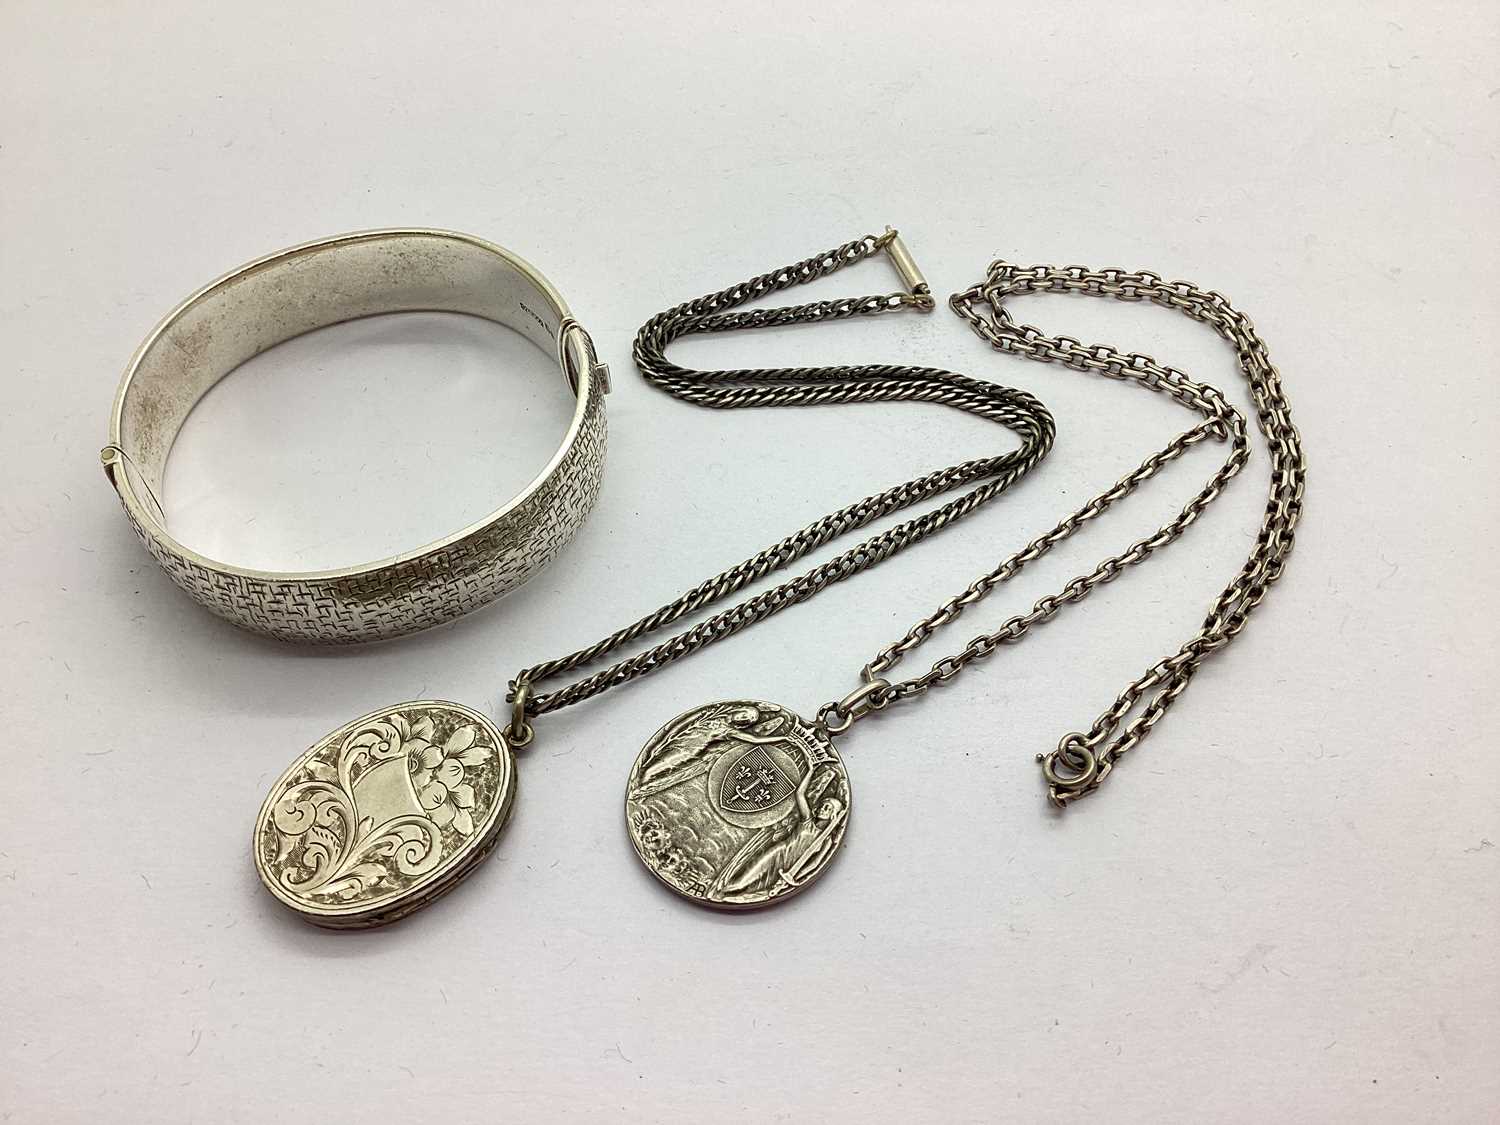 Joan of Arc 1915 Medallion Pendant, stamped "ABargas", on a chain; togerther with a foliate engraved